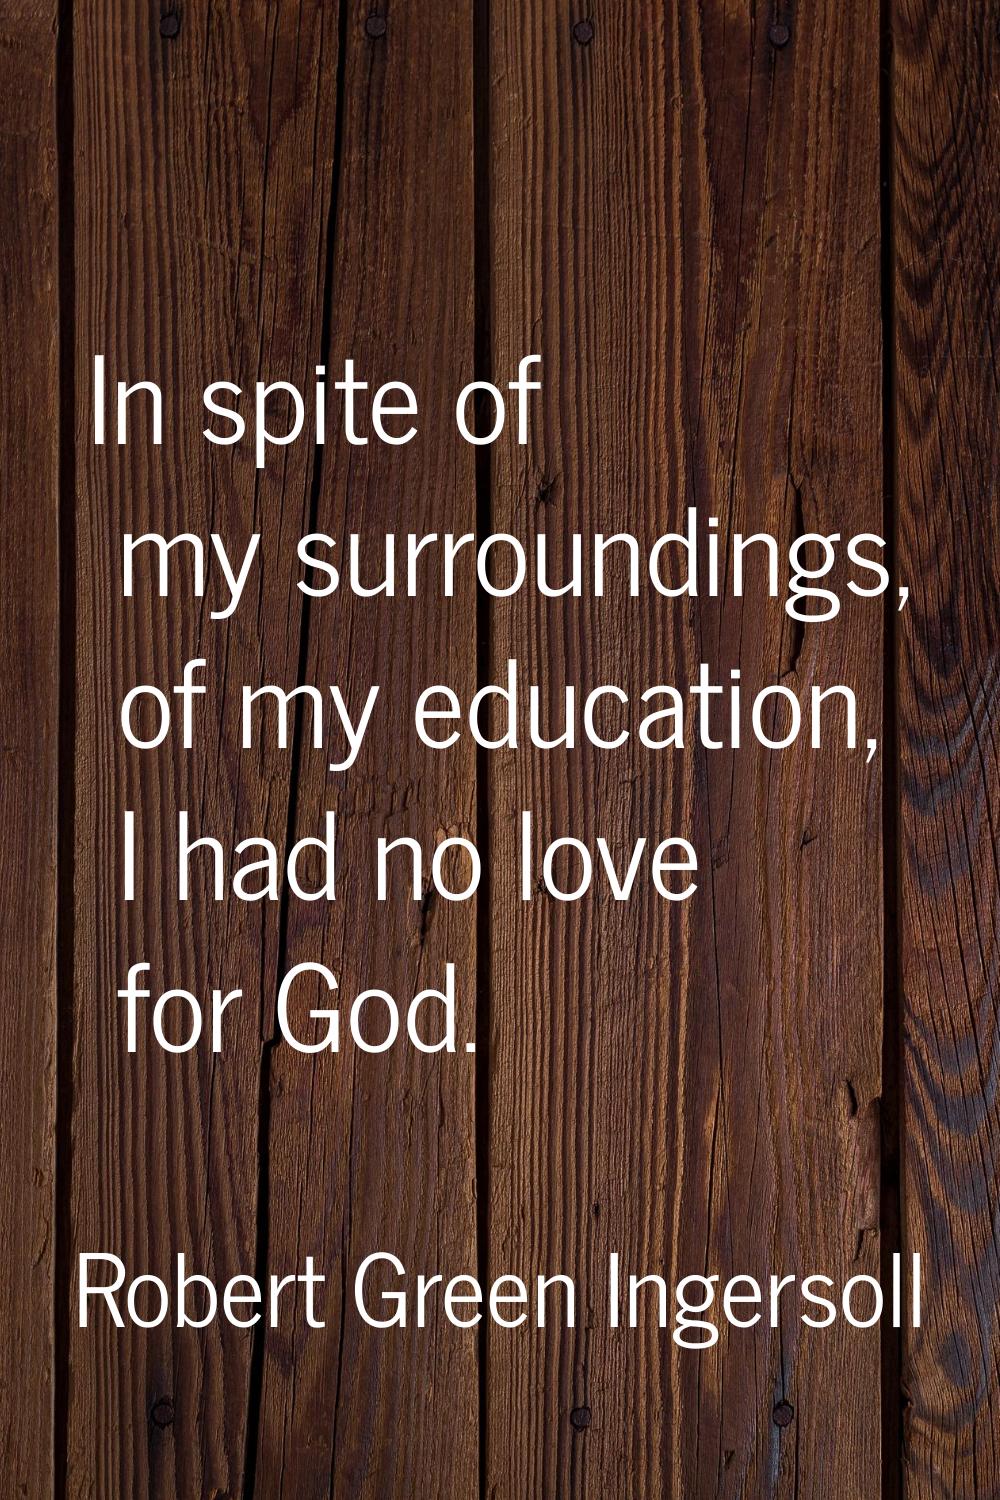 In spite of my surroundings, of my education, I had no love for God.